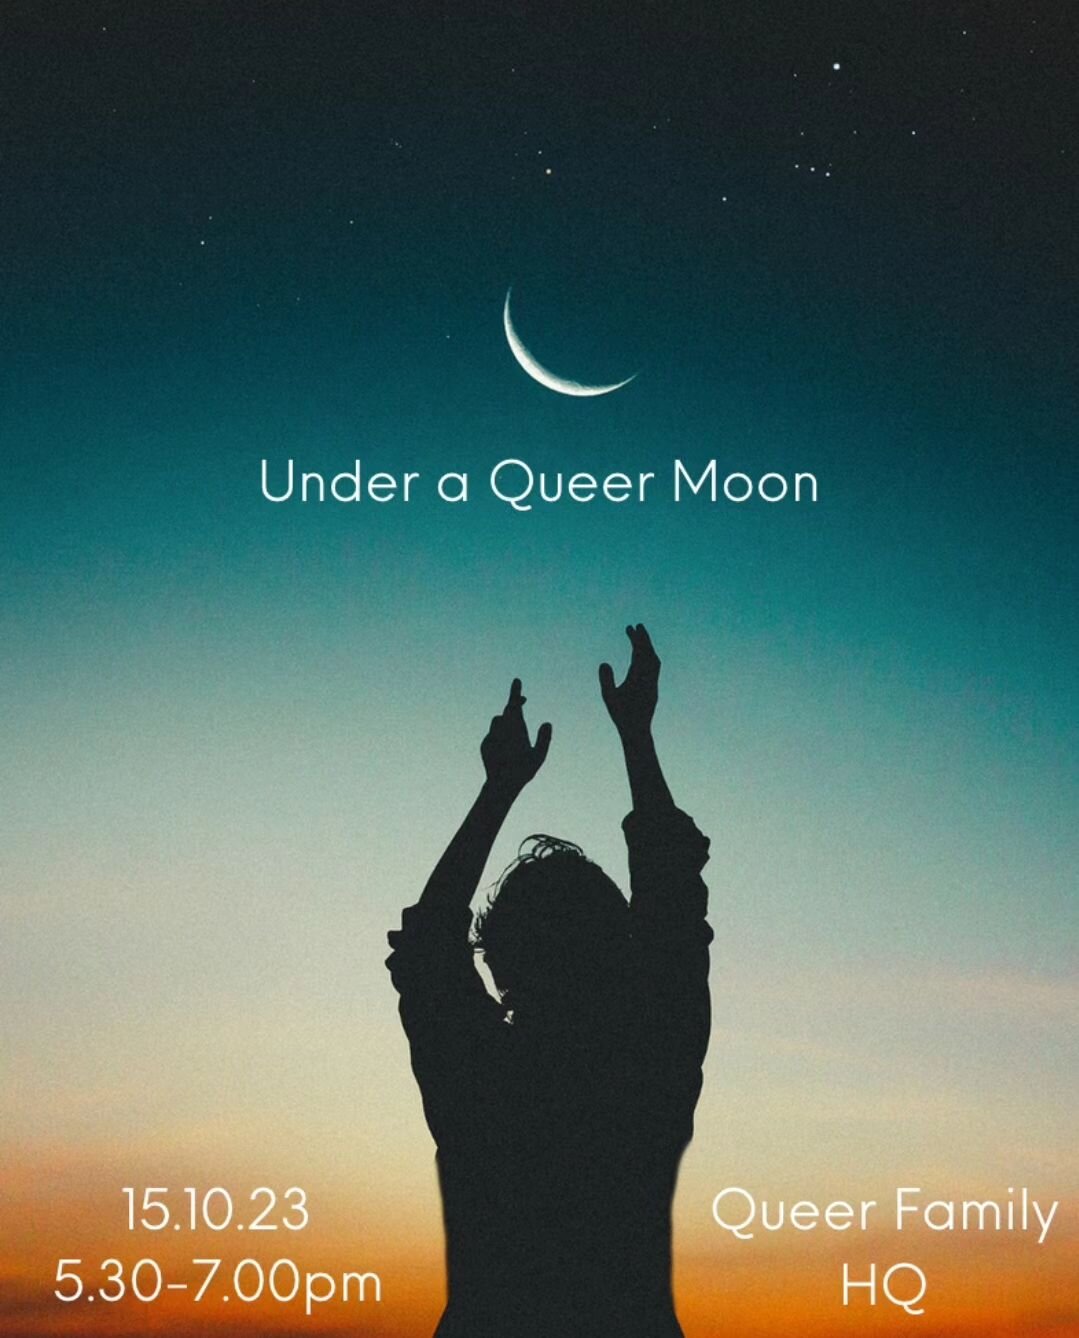 Join us Sunday night in Mullum for some queer community, connection and woo woo. 

Under a Queer Moon is a safe space to get in touch with your spirit and yourself. It's a place to give and receive support and to be amongst friends. Together we'll do